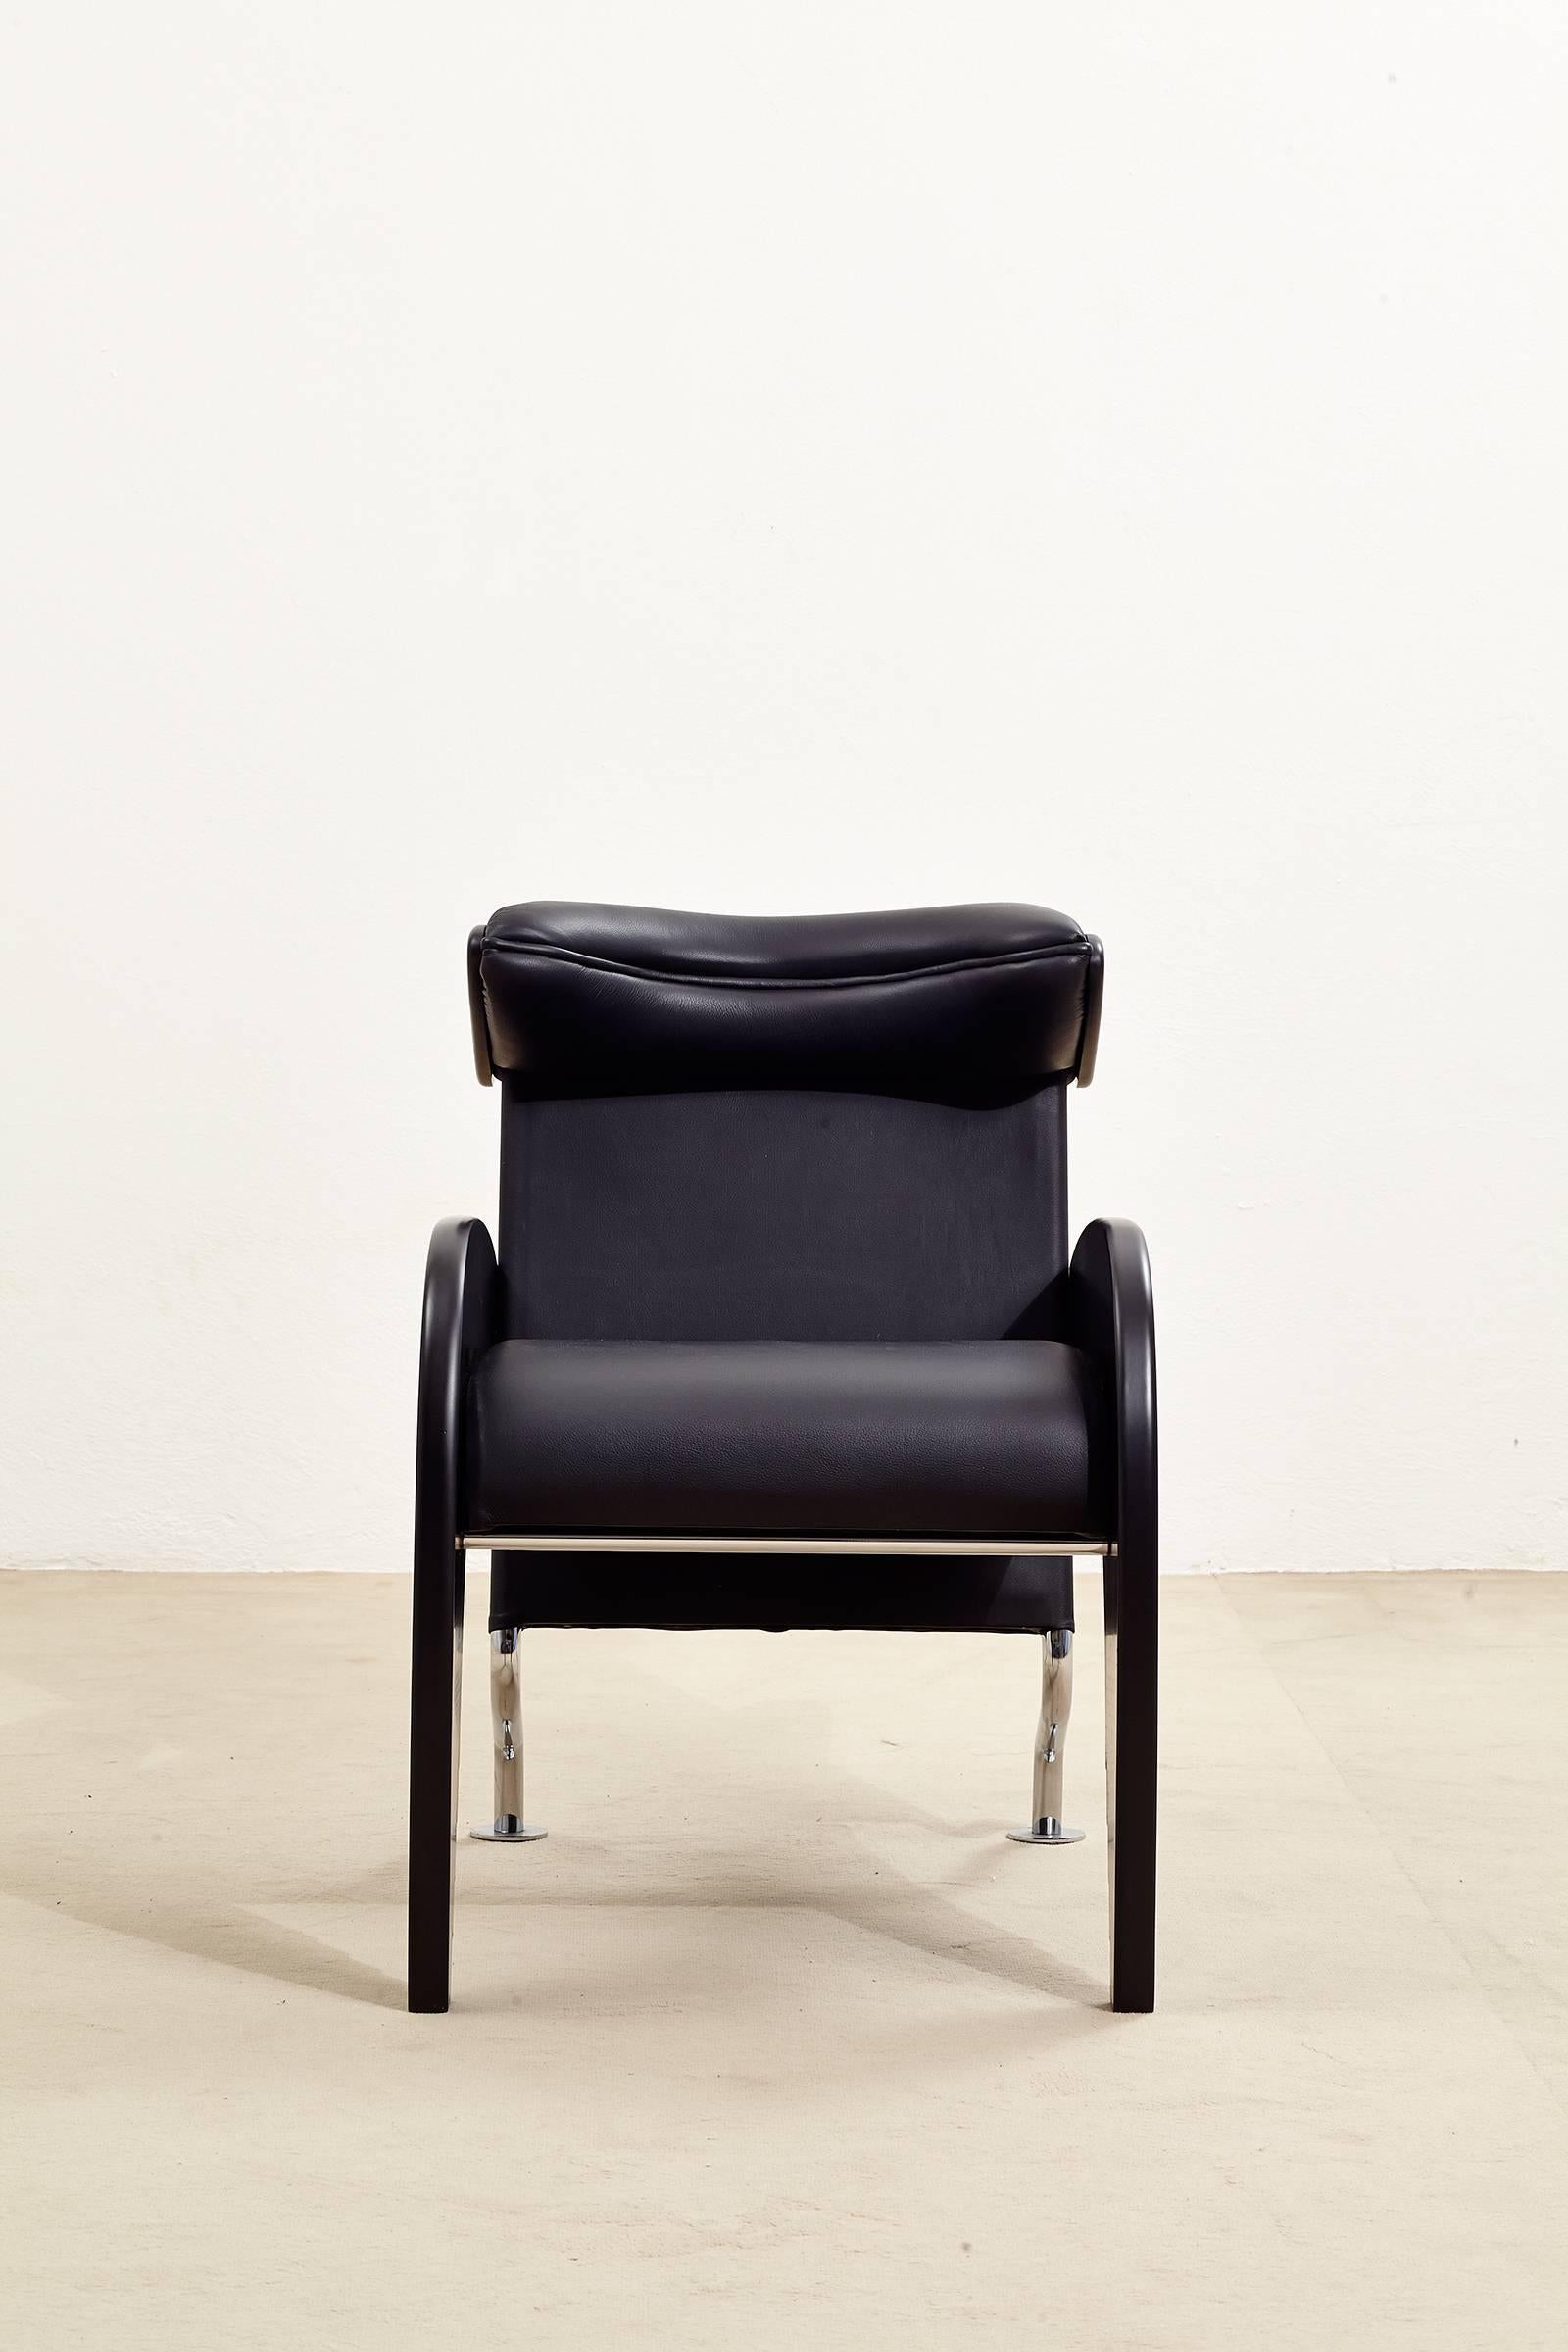 Armchair in wood and metal, upholstered in black leather. The piece clearly expresses the designers interest in dynamism that characterizes much of his work of the 1980s.